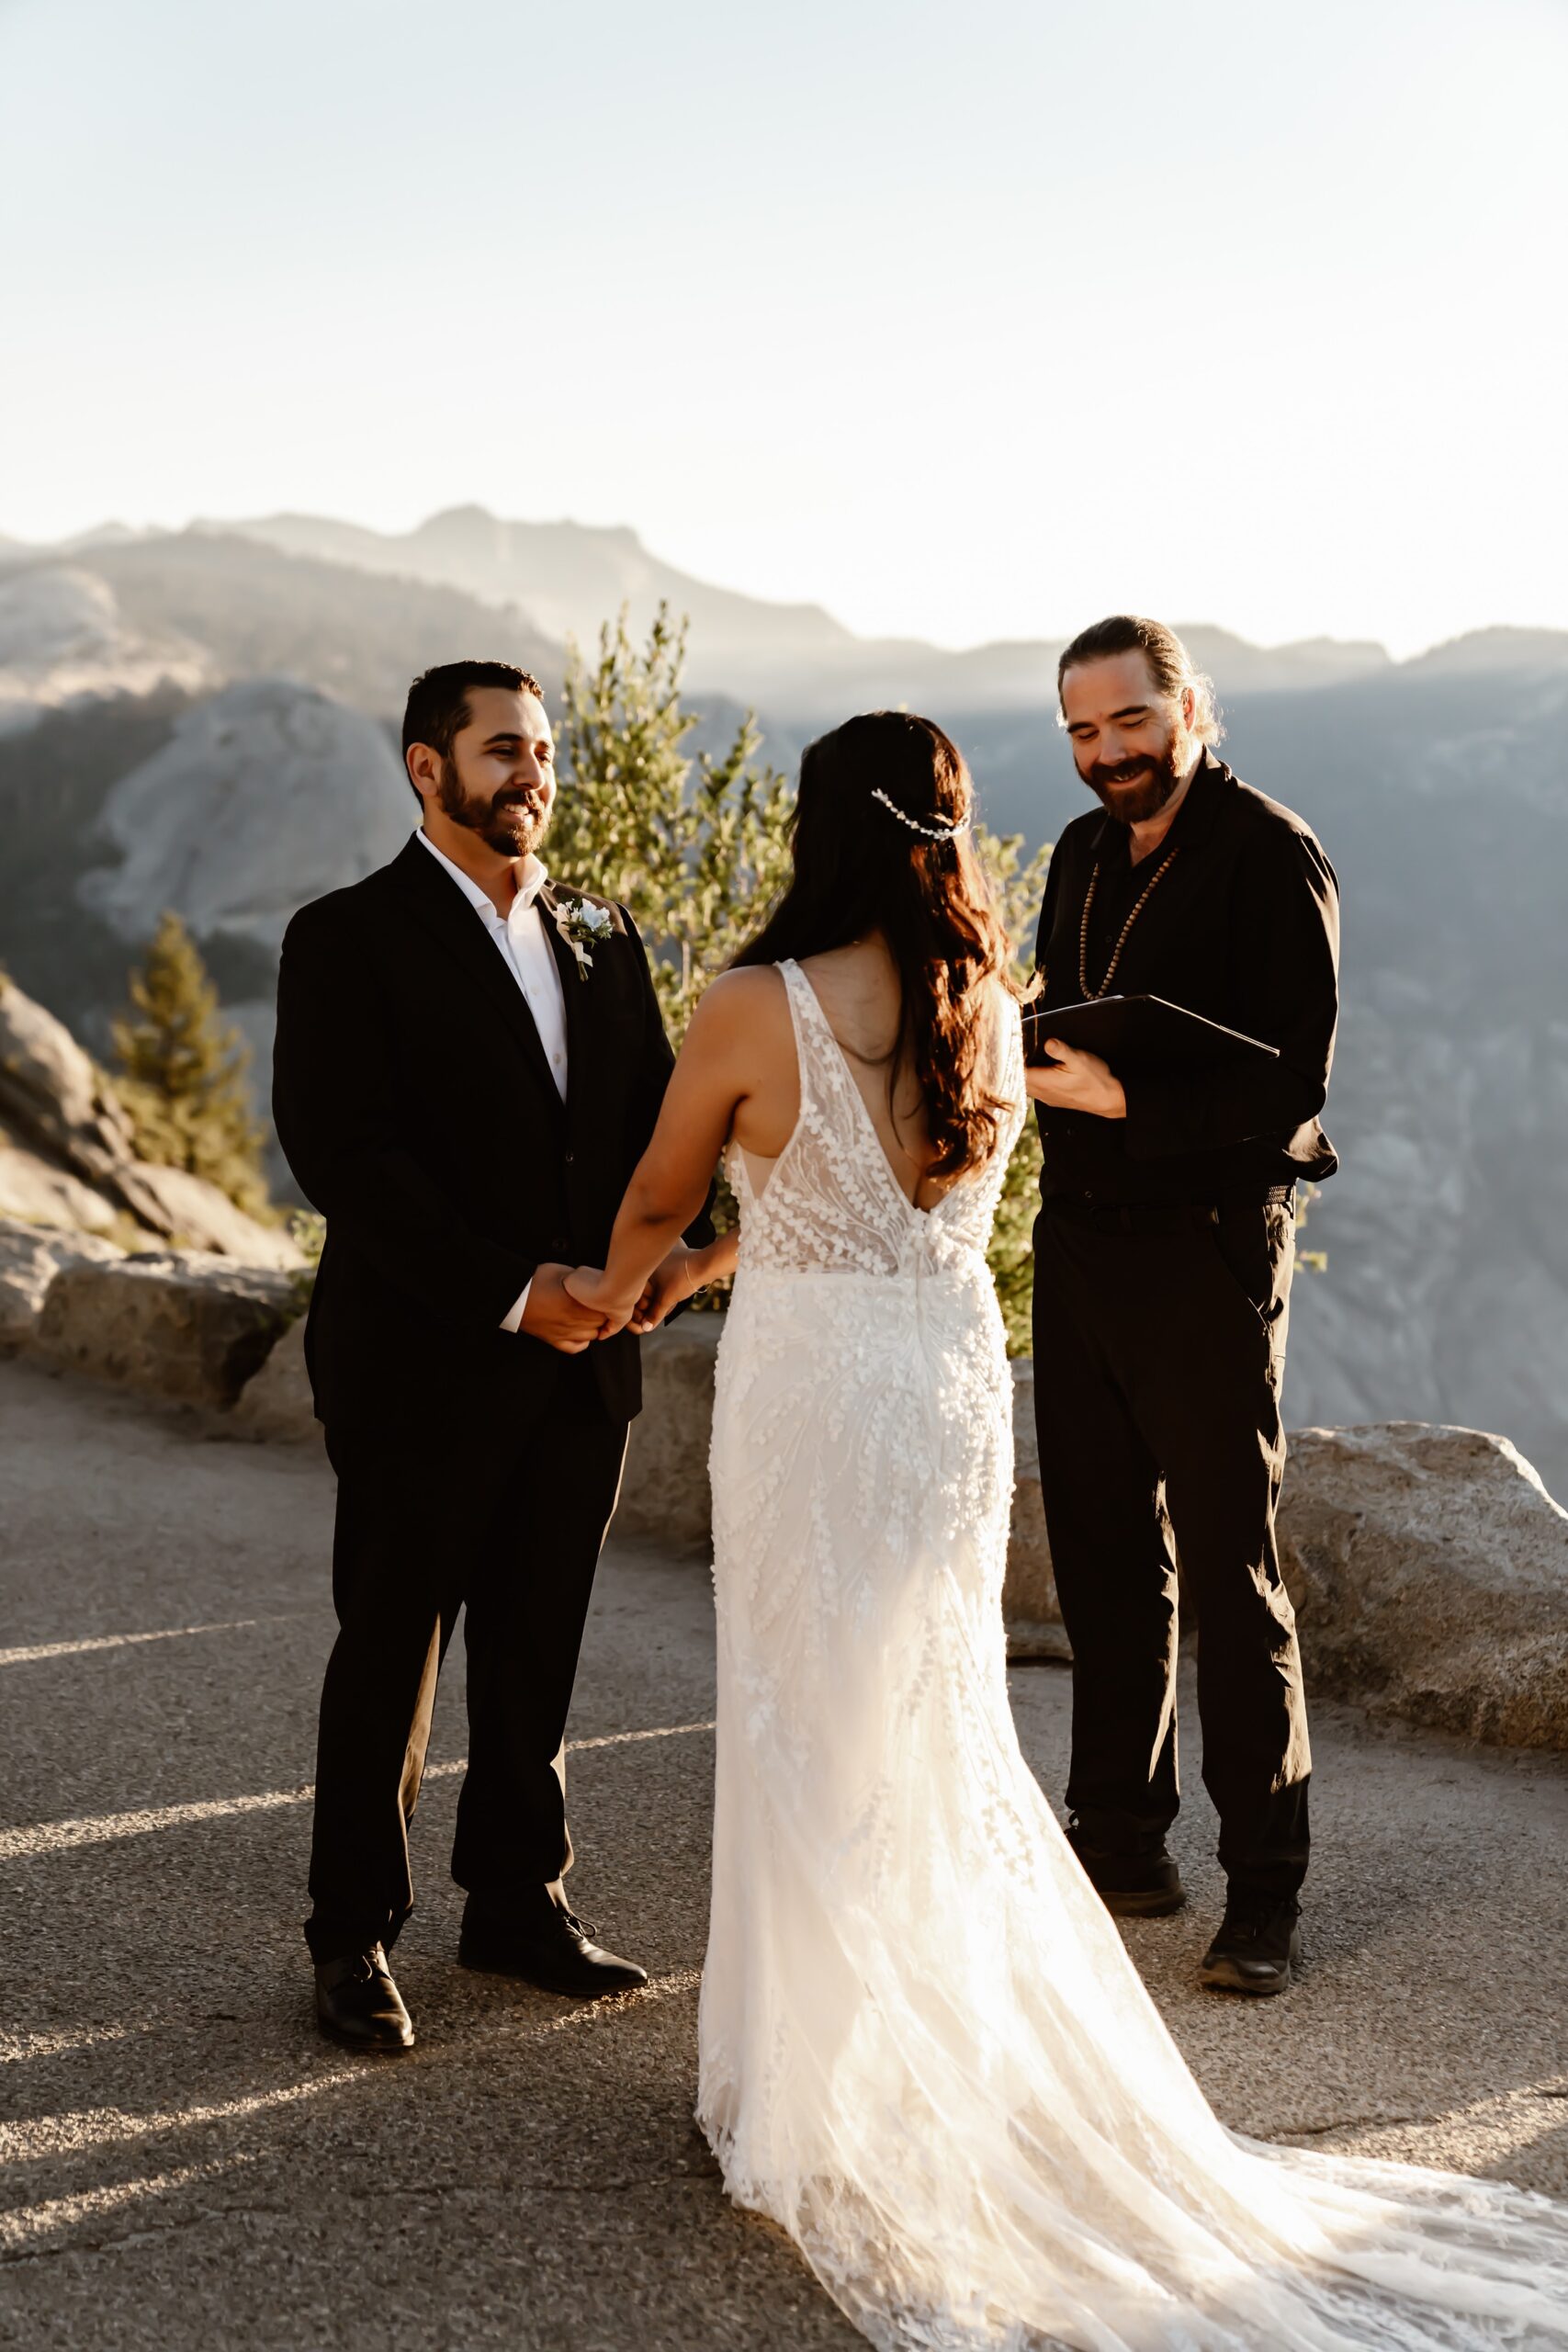 Bride and groom say vows at Glacier Point Amphitheater wedding ceremony